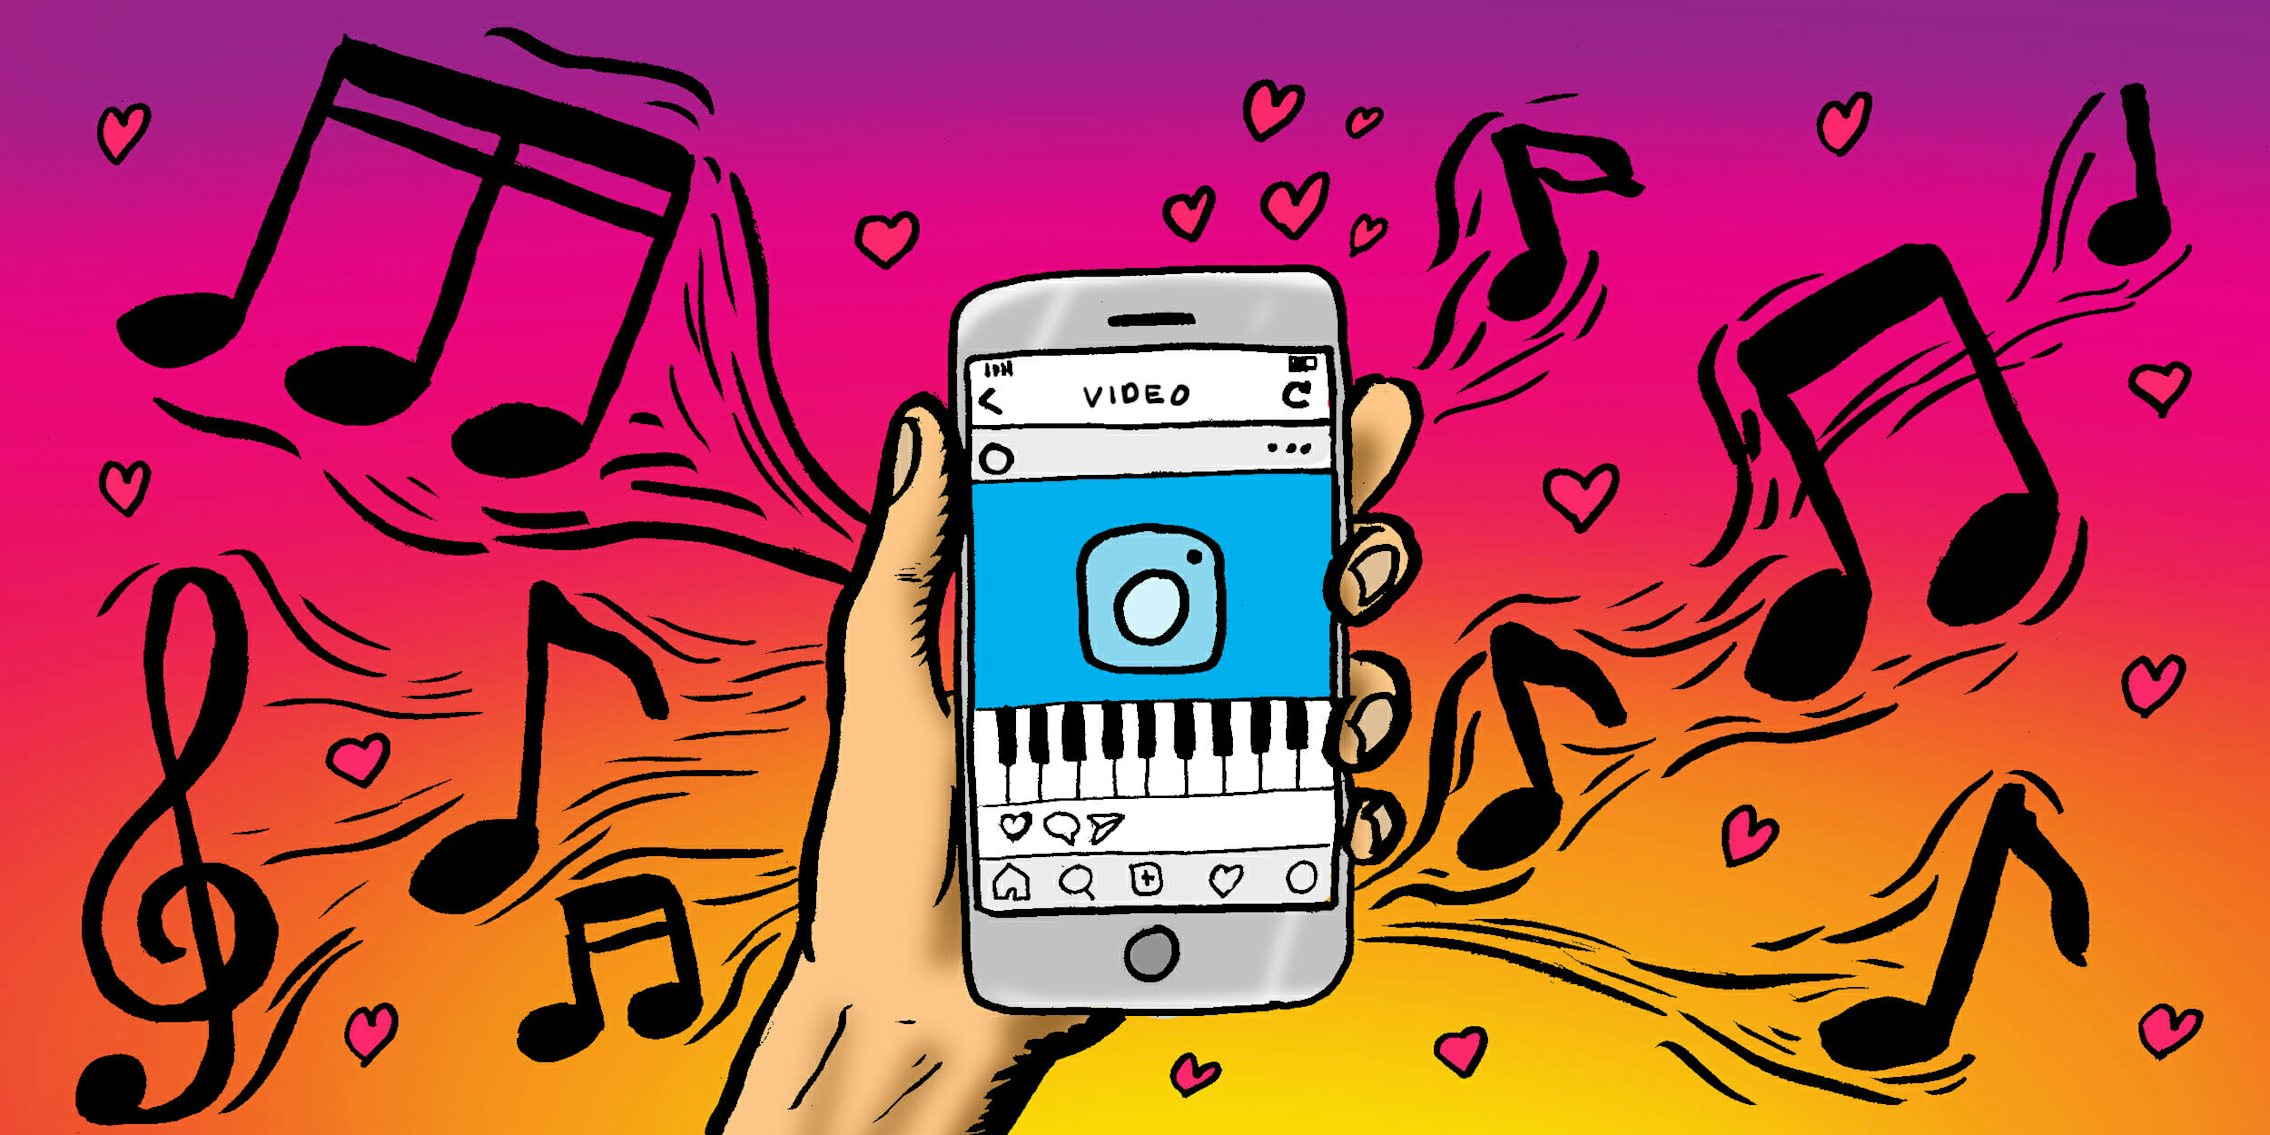 How to Add Music to Instagram Videos, Posts: 3 Easy Ways